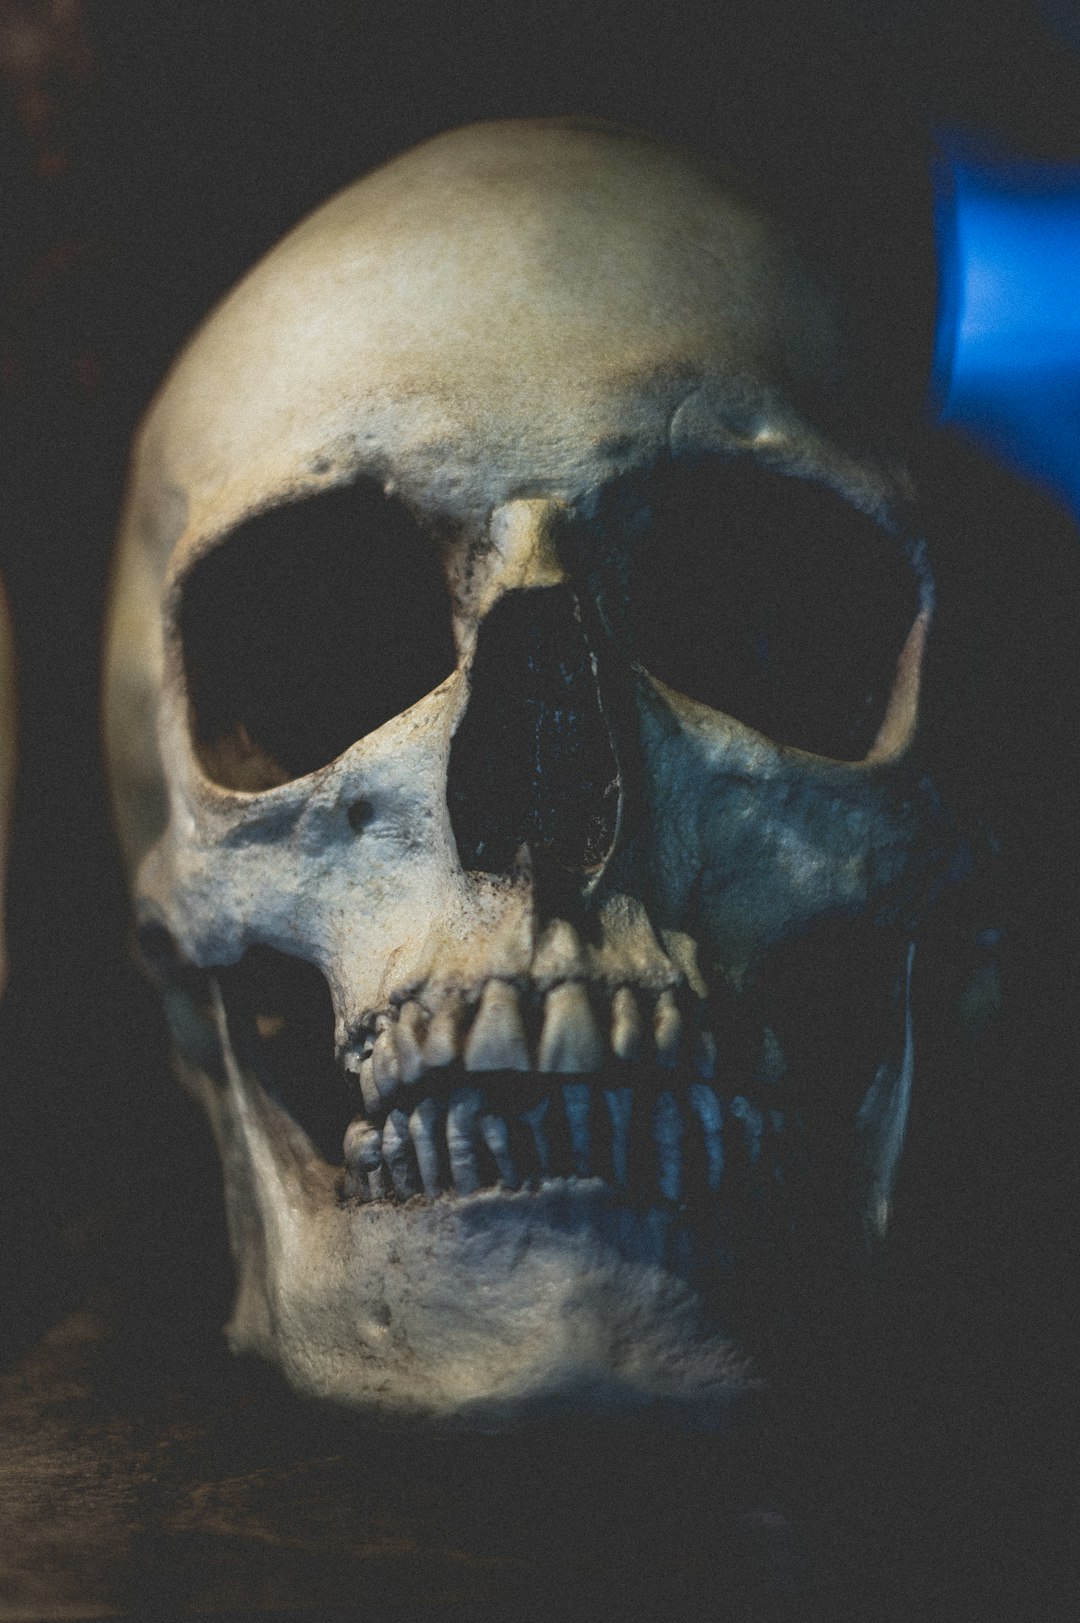 Skull Pictures | Download Free Images